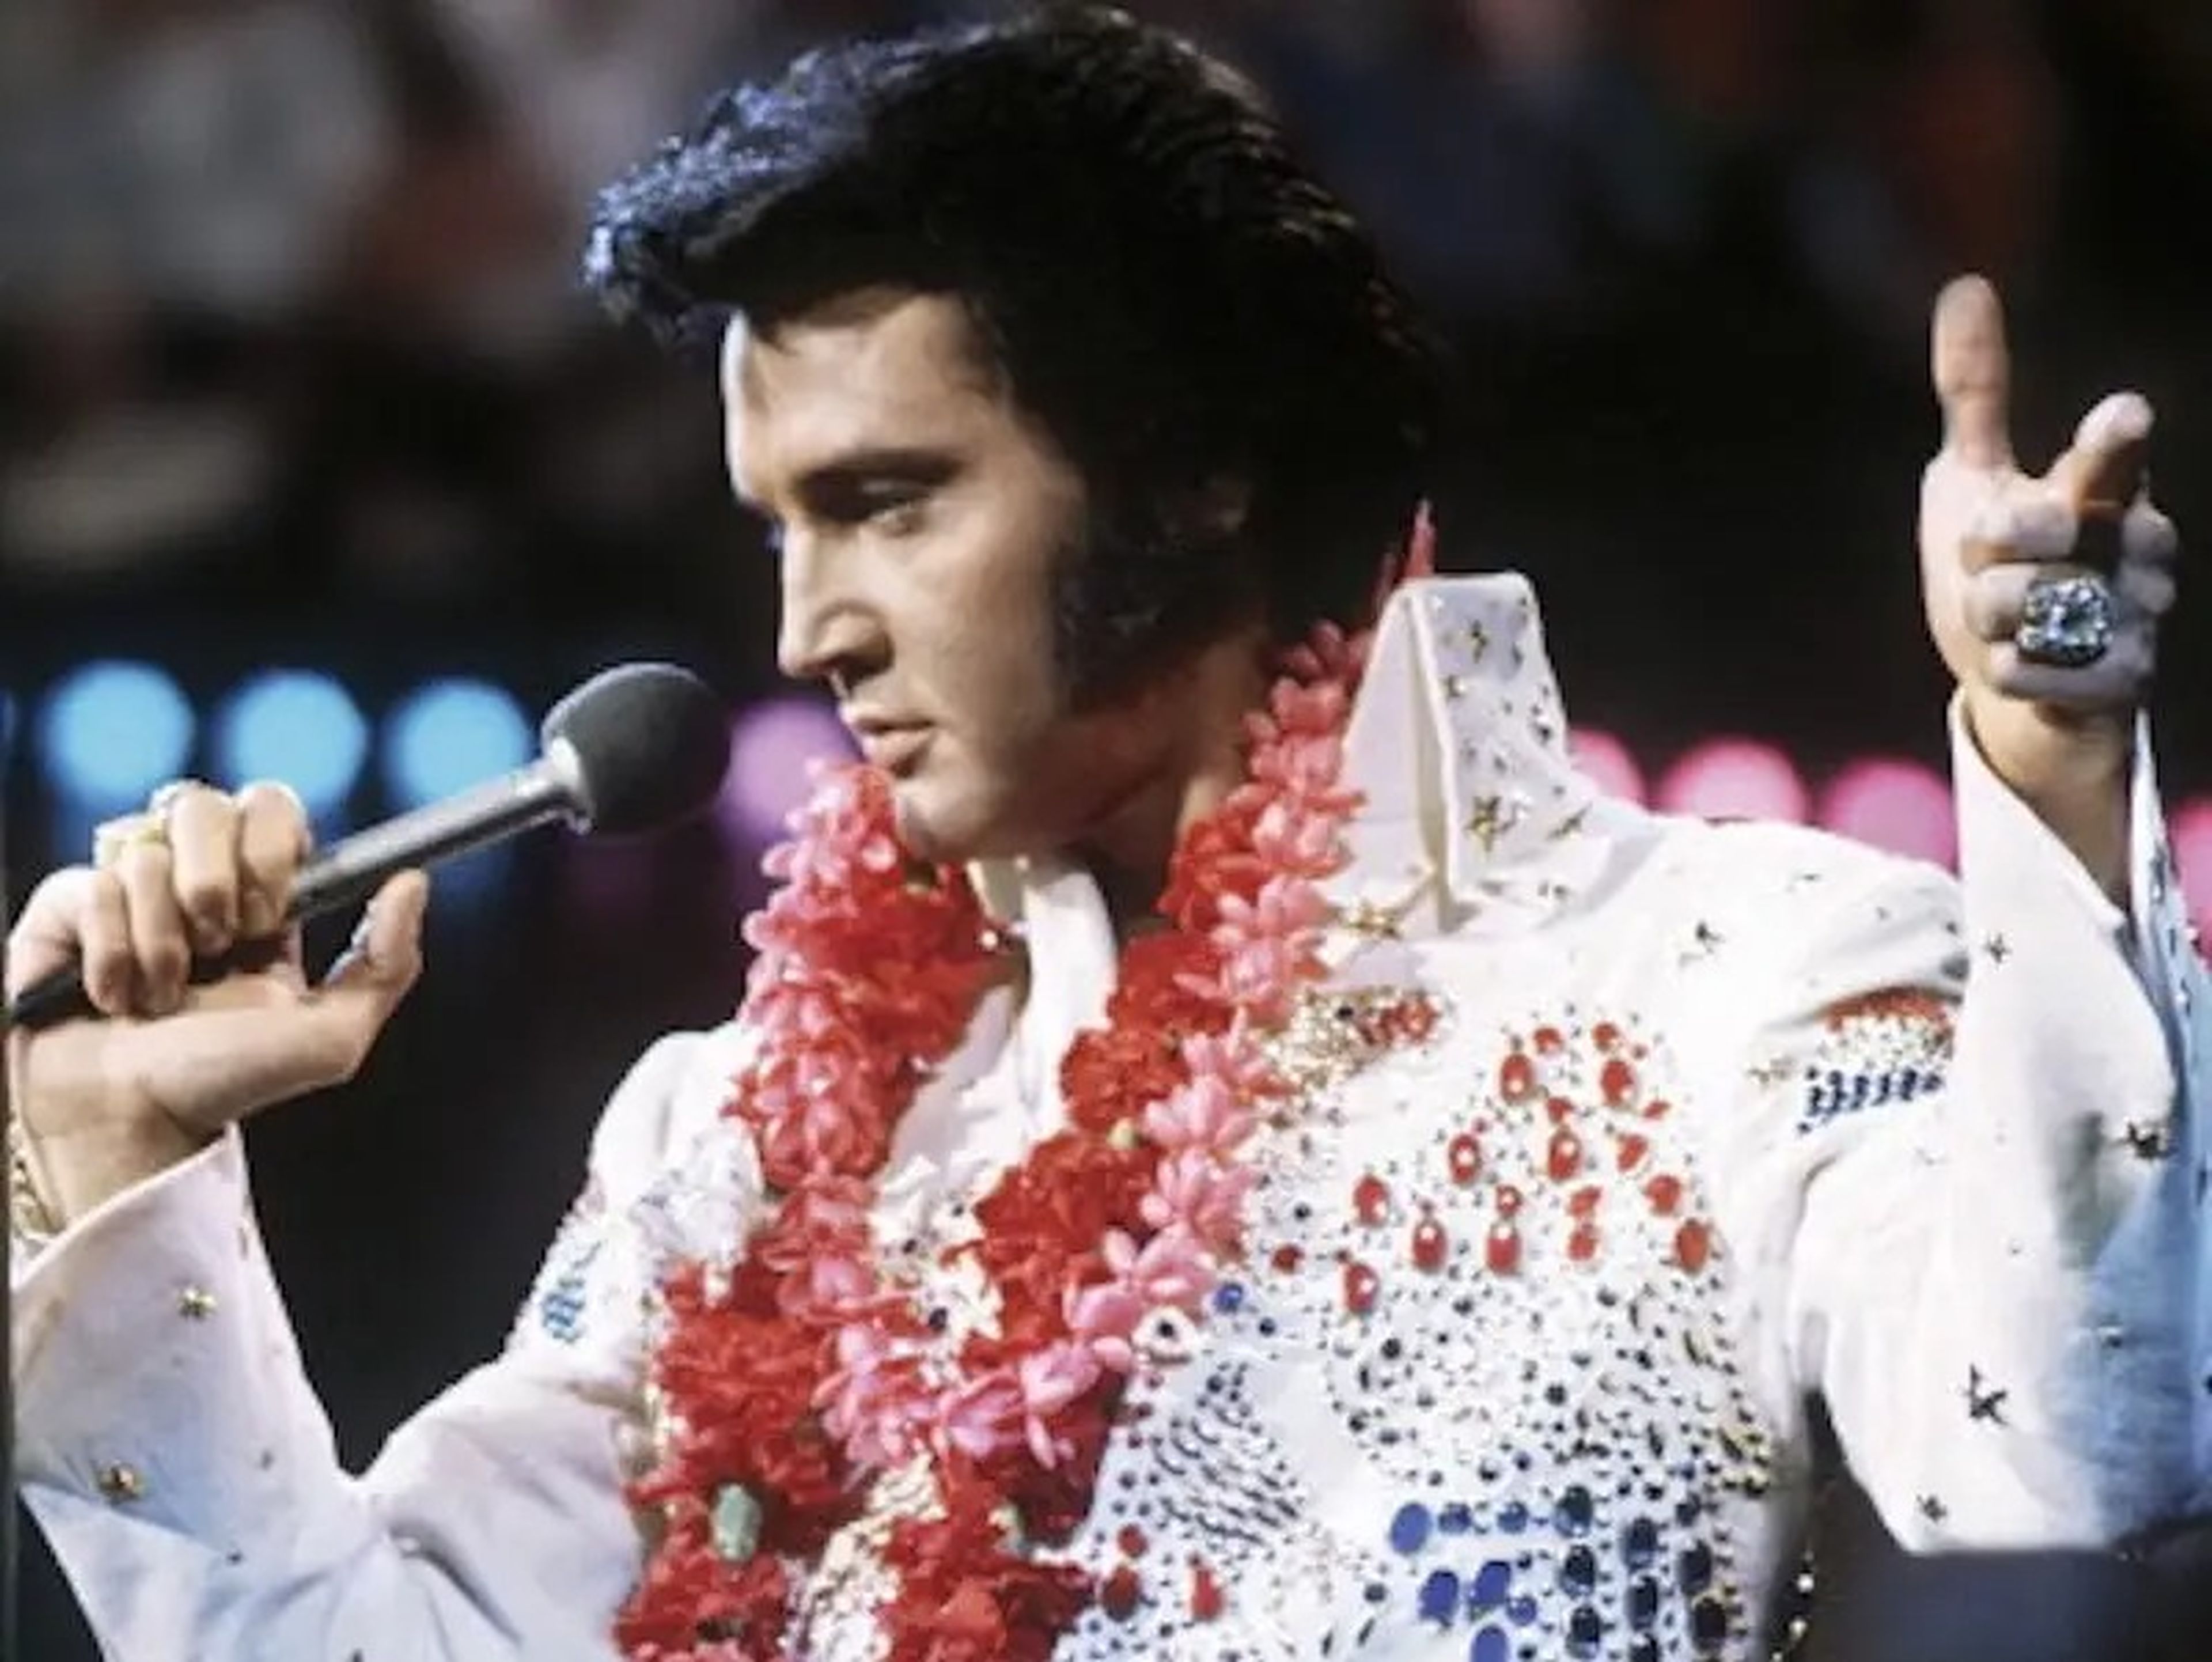 Elvis Presley may have been considered for an iconic cameo in "Grease."